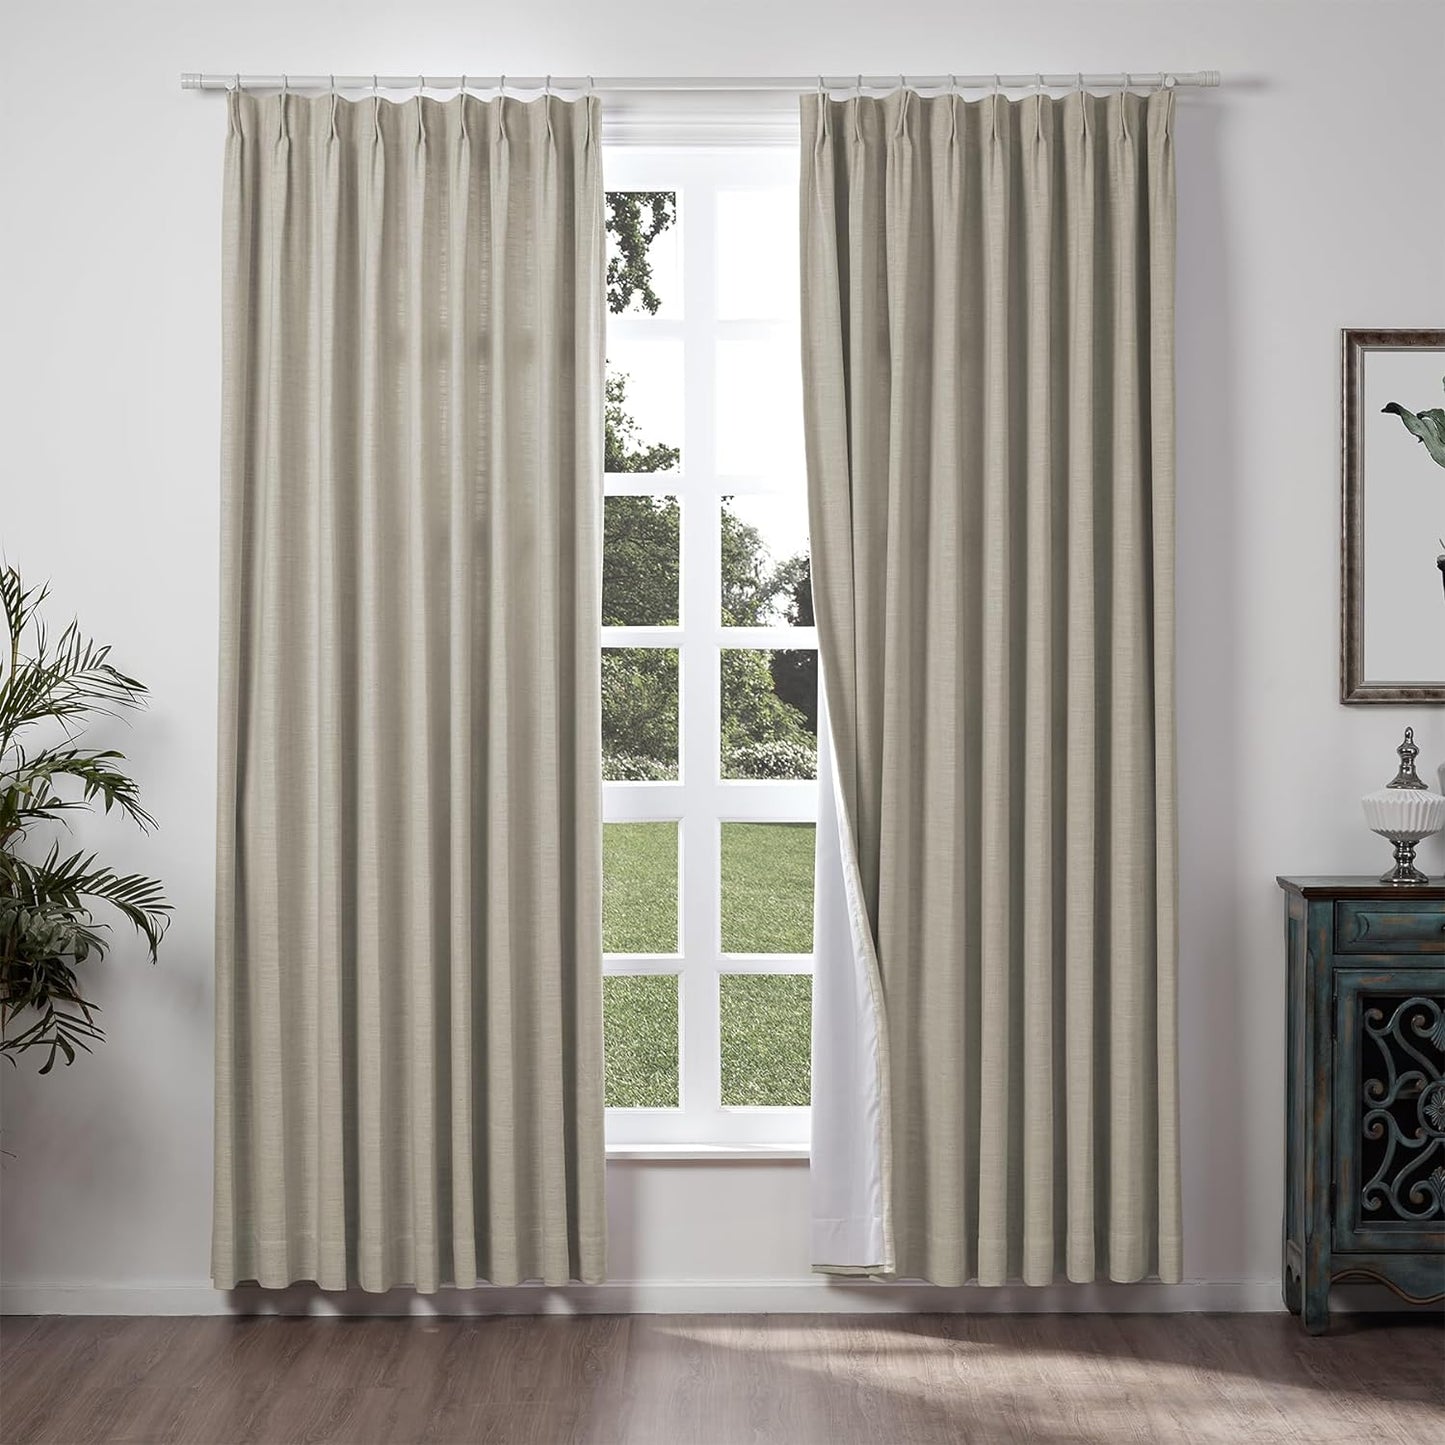 Chadmade 50" W X 63" L Polyester Linen Drape with Blackout Lining Pinch Pleat Curtain for Sliding Door Patio Door Living Room Bedroom, (1 Panel) Sand Beige Tallis Collection  ChadMade Birch (5) 100Wx102L 